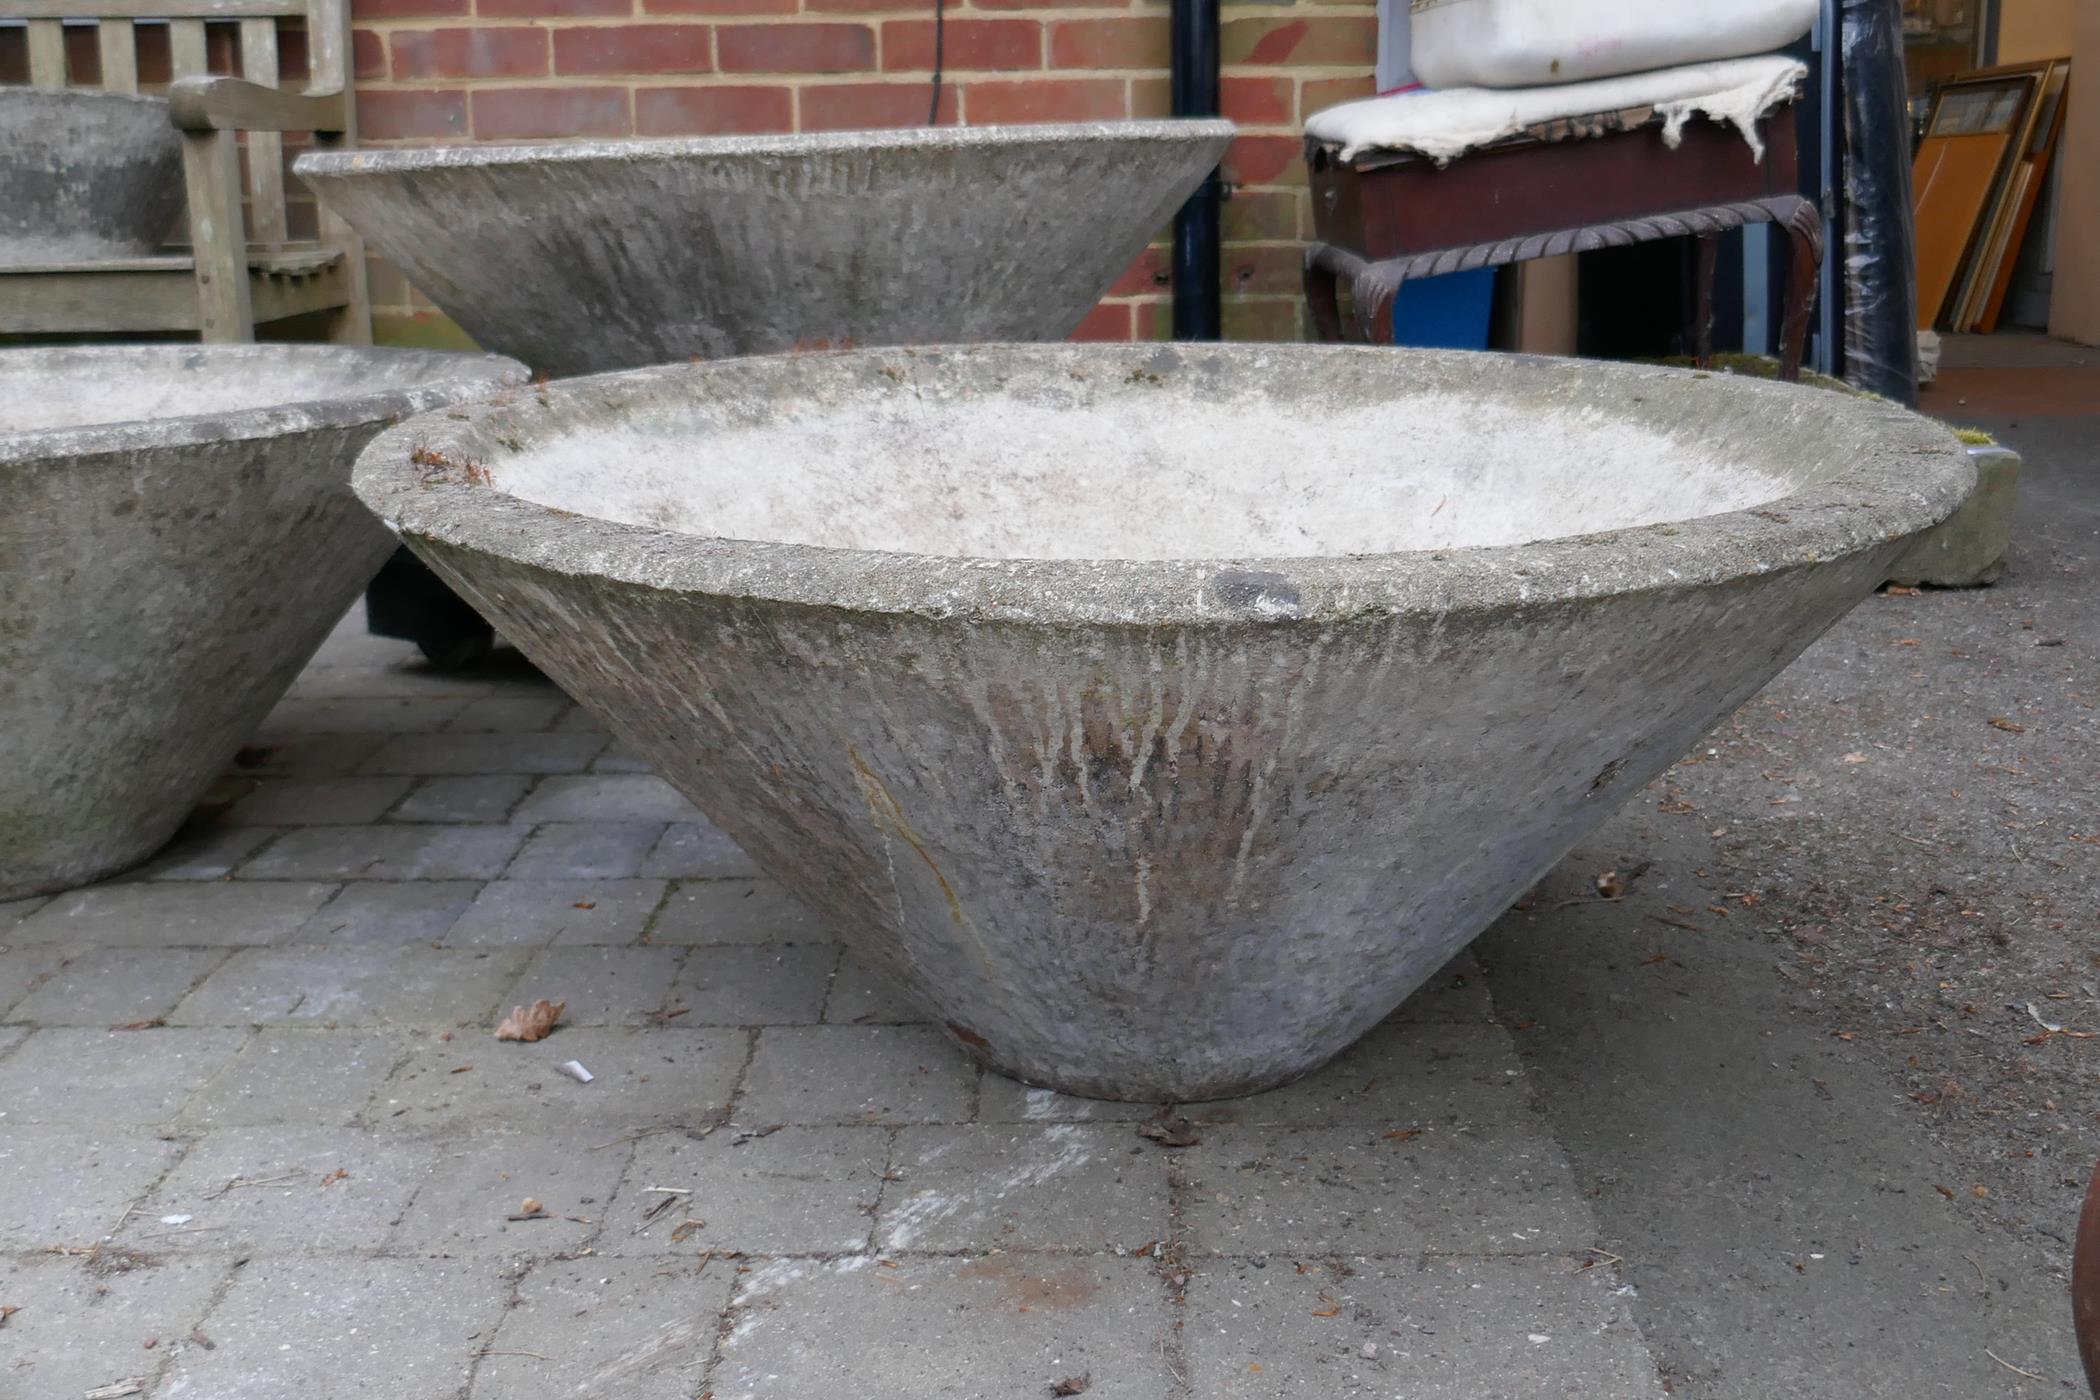 Three mid century conical concrete garden planters with bark effect exterior, 35" diameter - Image 2 of 6